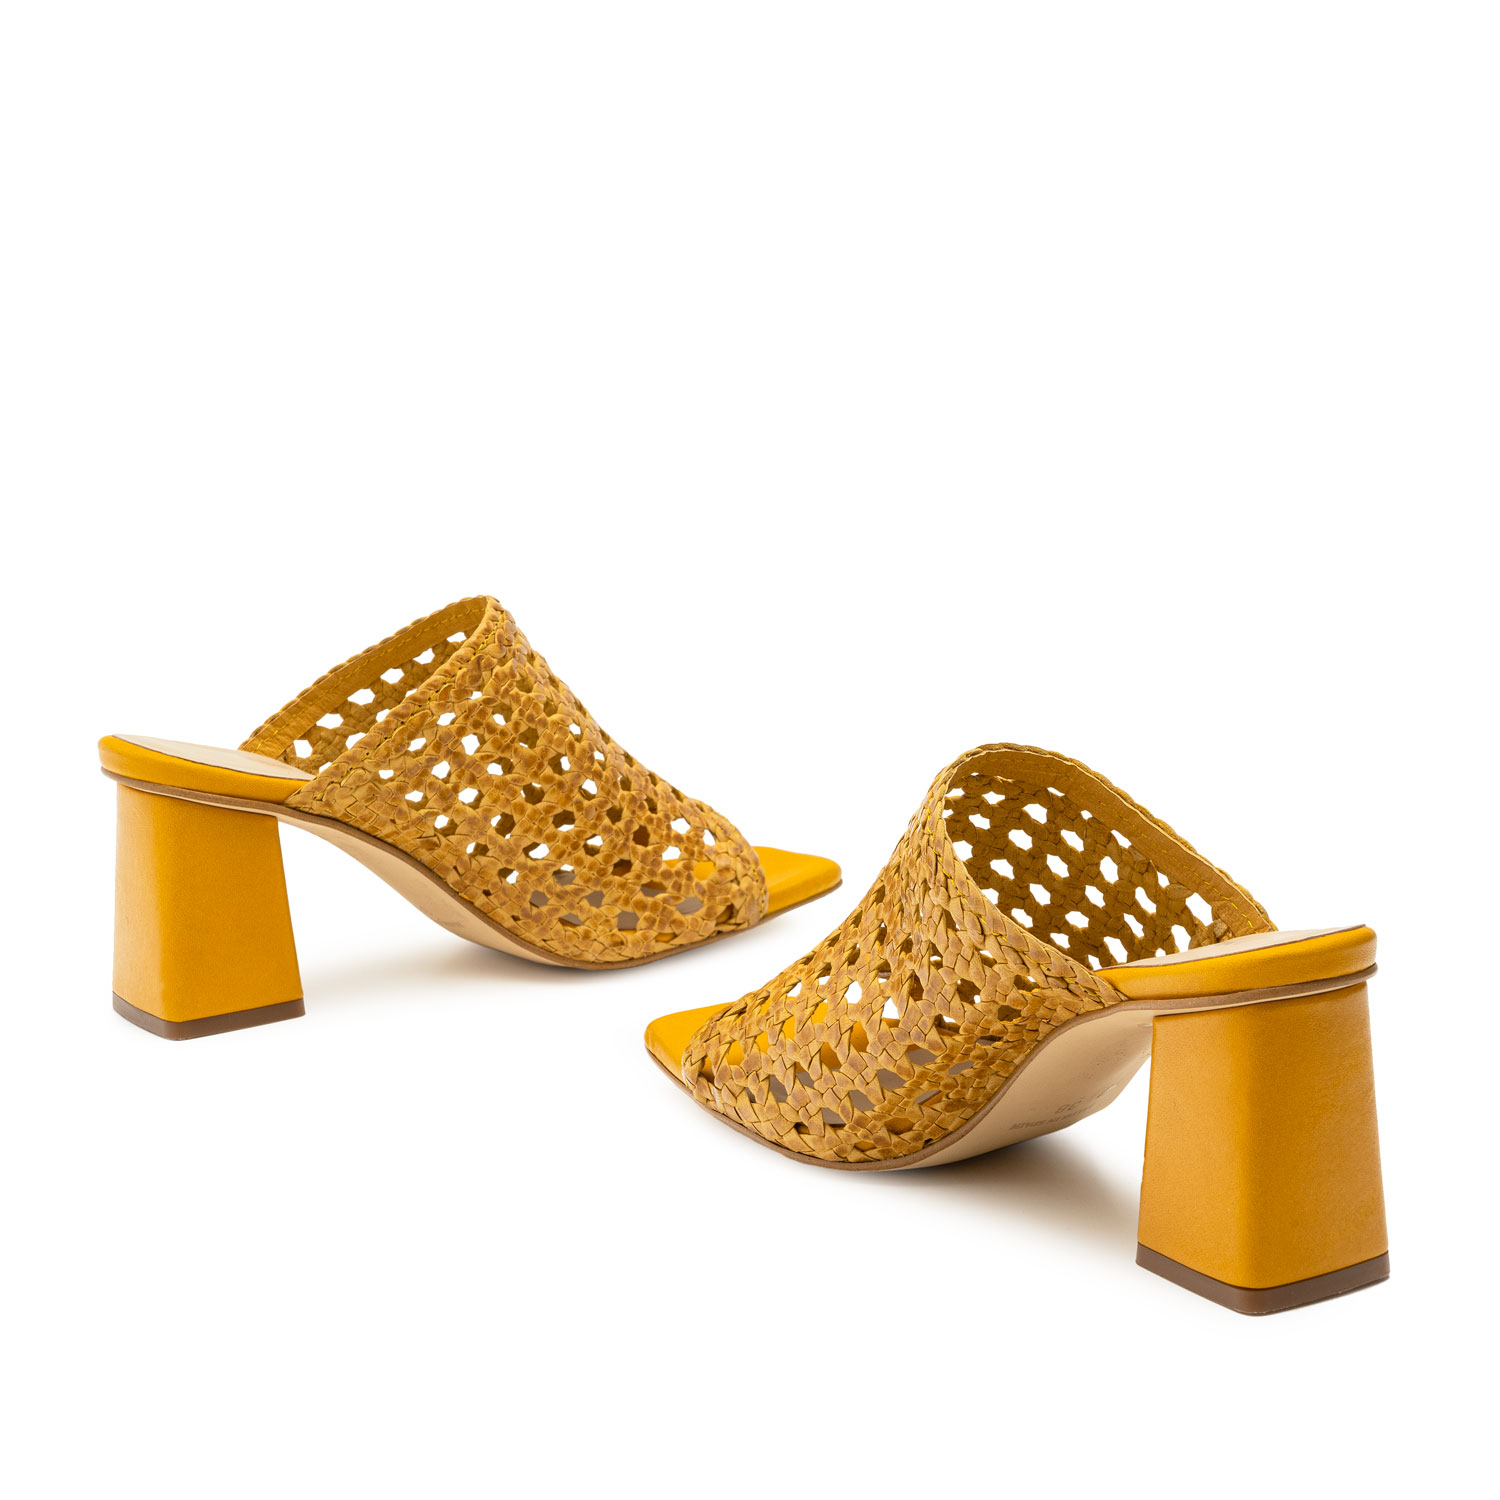 Braided Mules in Mustard Leather 